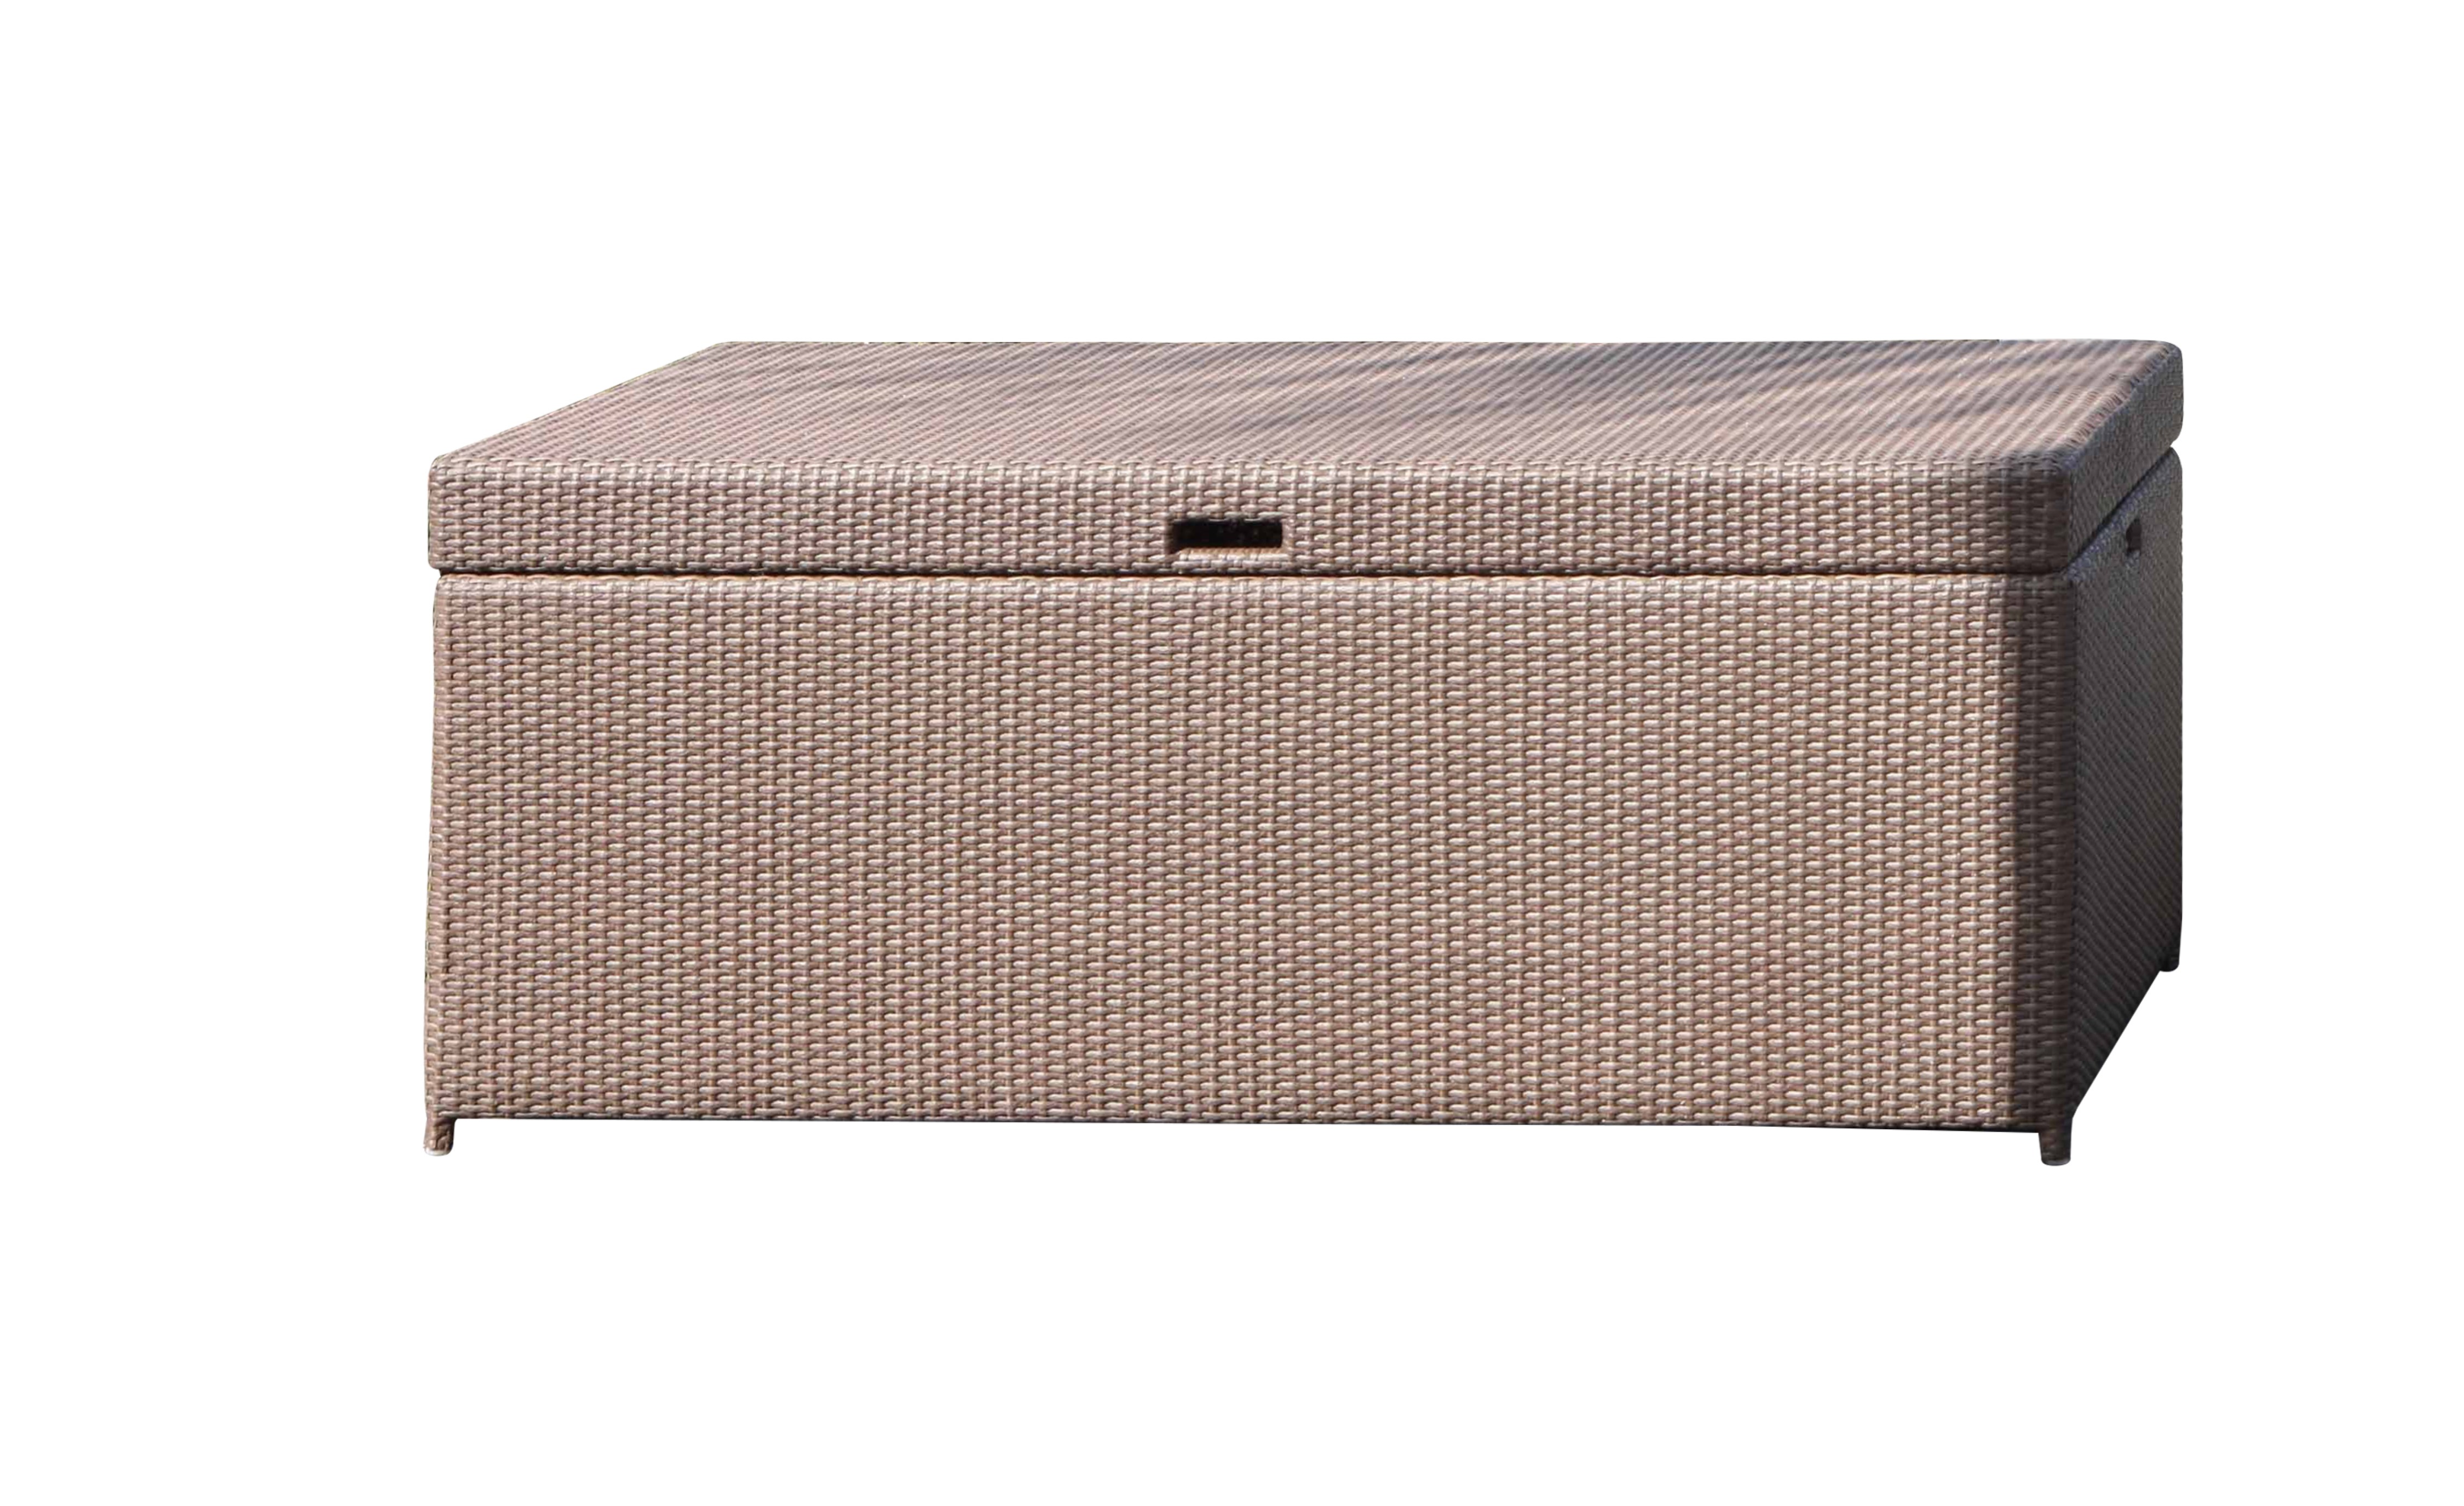 belevedere storage box product image